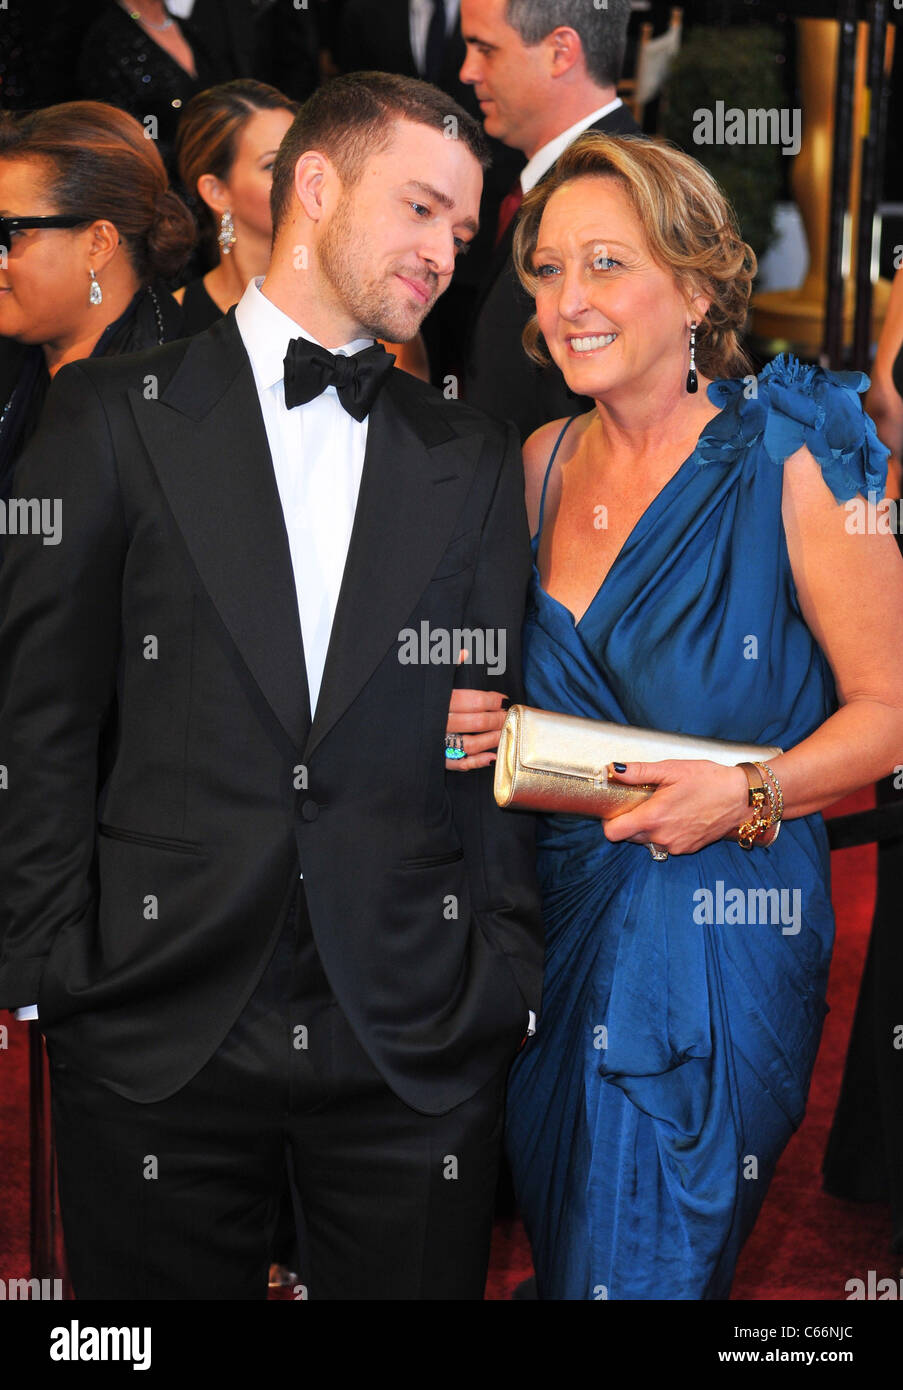 Justin Timberlake, Mother Lynn Harless at arrivals for The 83rd Academy Awards Oscars - Arrivals Part 2, The Kodak Theatre, Los Stock Photo